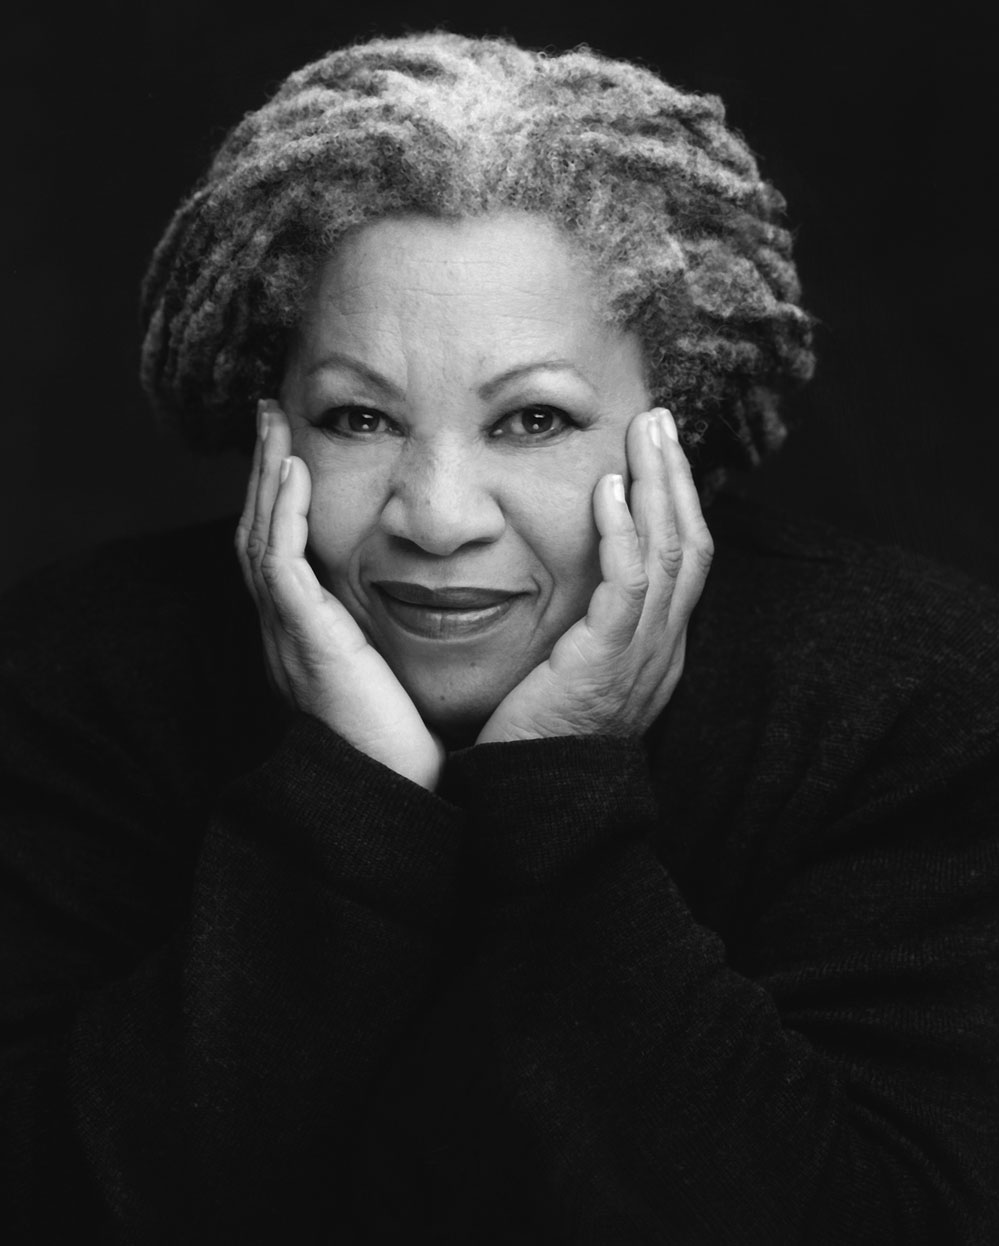 Toni Morrison in TONI MORRISON: THE PIECES I AM, a Magnolia Pictures release. ©Timothy Greenfield-Sanders / Courtesy of Magnolia Pictures